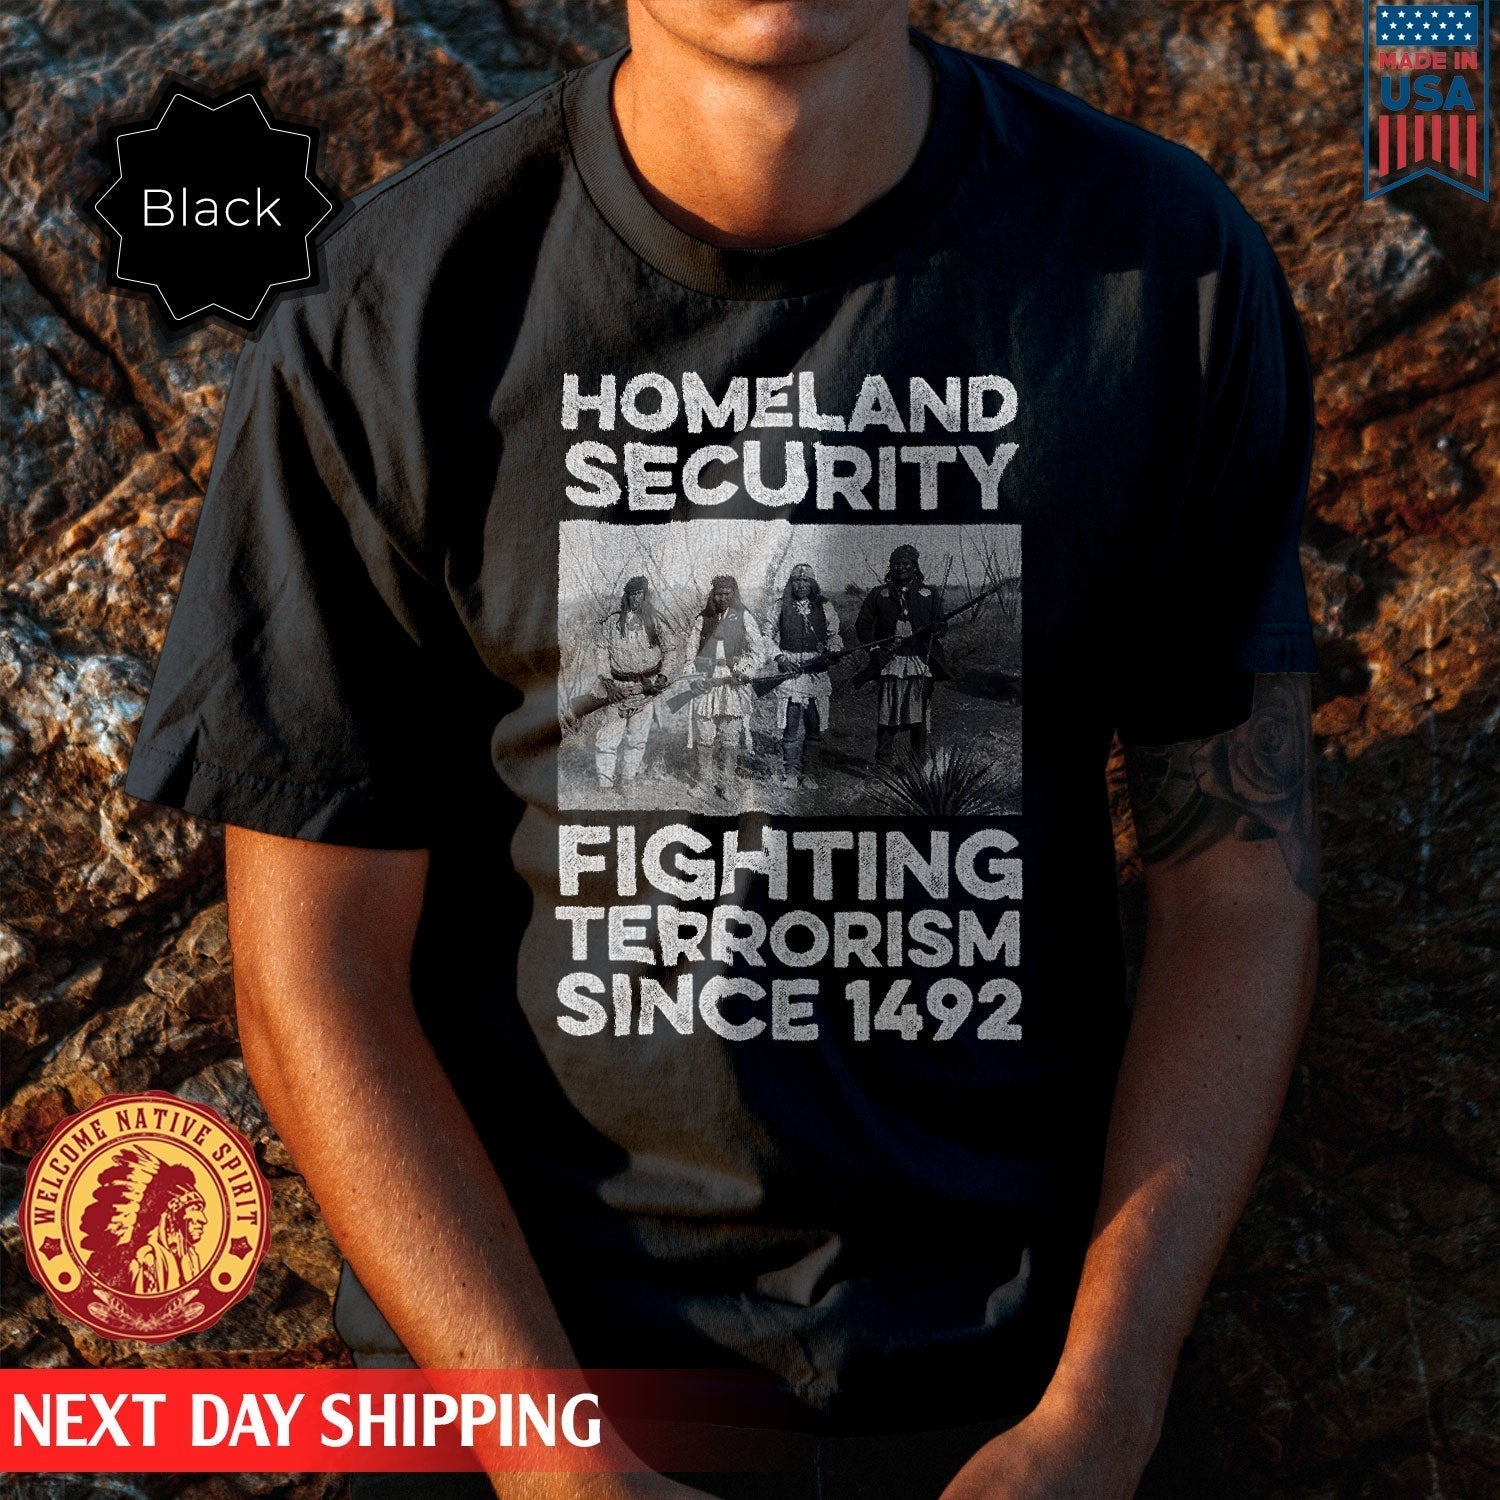 Native American - Homeland Security Fighting Terrorism Since 1492 Four Man Fighting Shirt 024